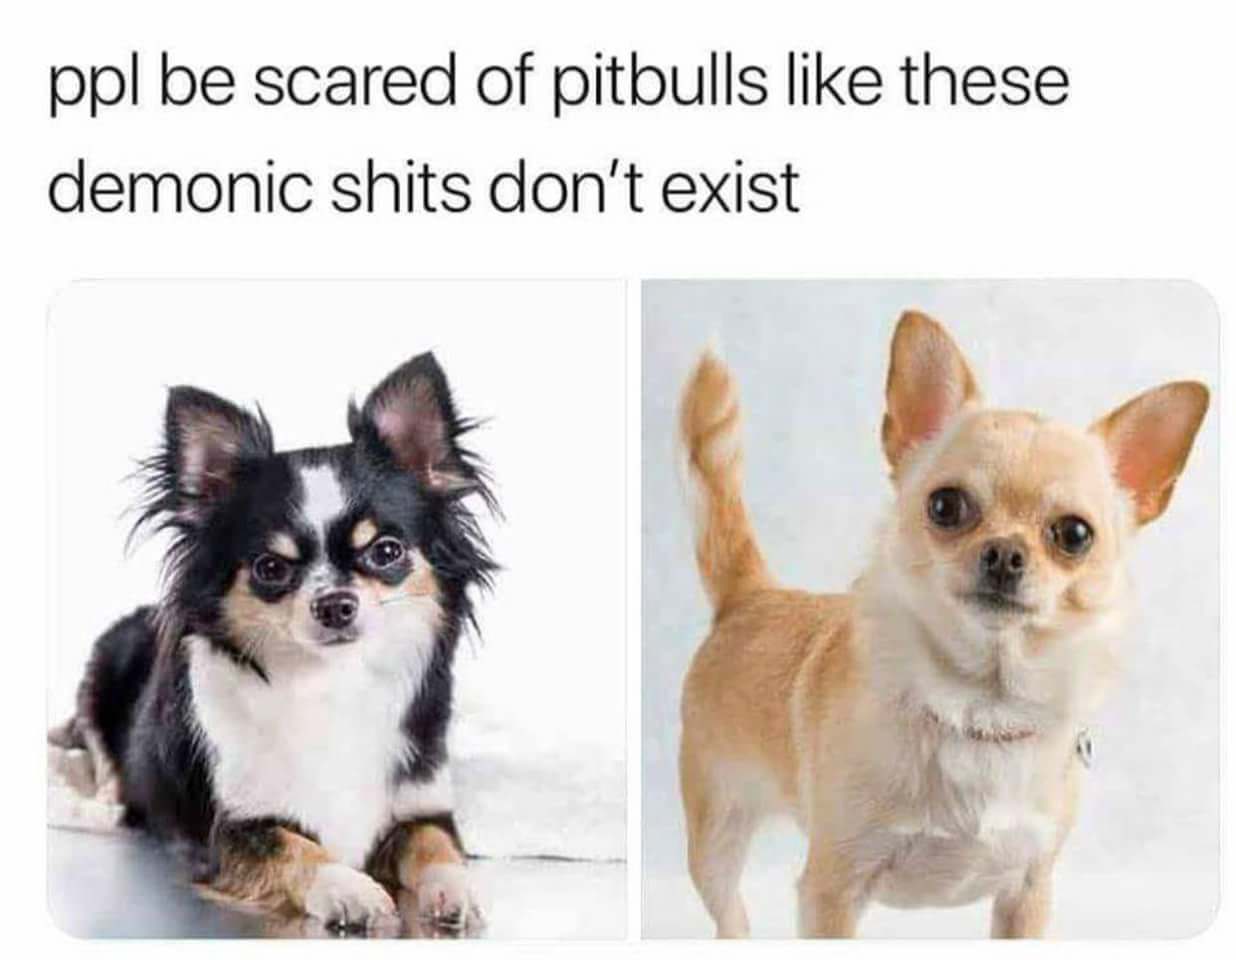 ppl be scared of pitbulls - ppl be scared of pitbulls these demonic shits don't exist